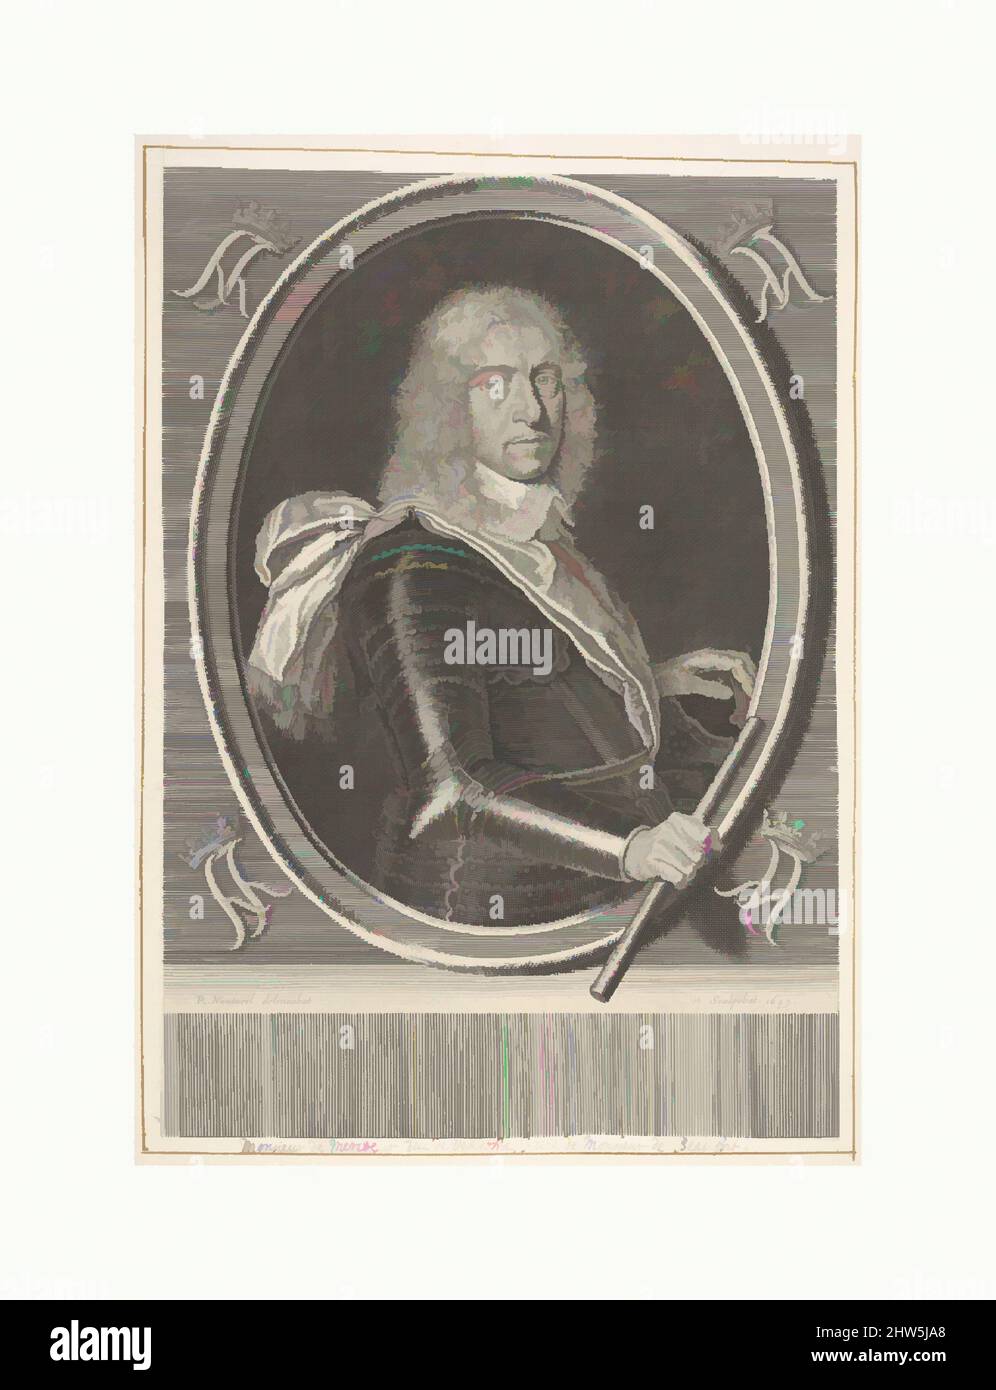 Art inspired by Louis de Bourbon-Vendôme, duc de Mercoeur, 1649, Engraving; first state of two (Petitjean & Wickert), Sheet: 11 1/4 × 7 7/8 in. (28.5 × 20 cm), Prints, Robert Nanteuil (French, Reims 1623–1678 Paris, Classic works modernized by Artotop with a splash of modernity. Shapes, color and value, eye-catching visual impact on art. Emotions through freedom of artworks in a contemporary way. A timeless message pursuing a wildly creative new direction. Artists turning to the digital medium and creating the Artotop NFT Stock Photo